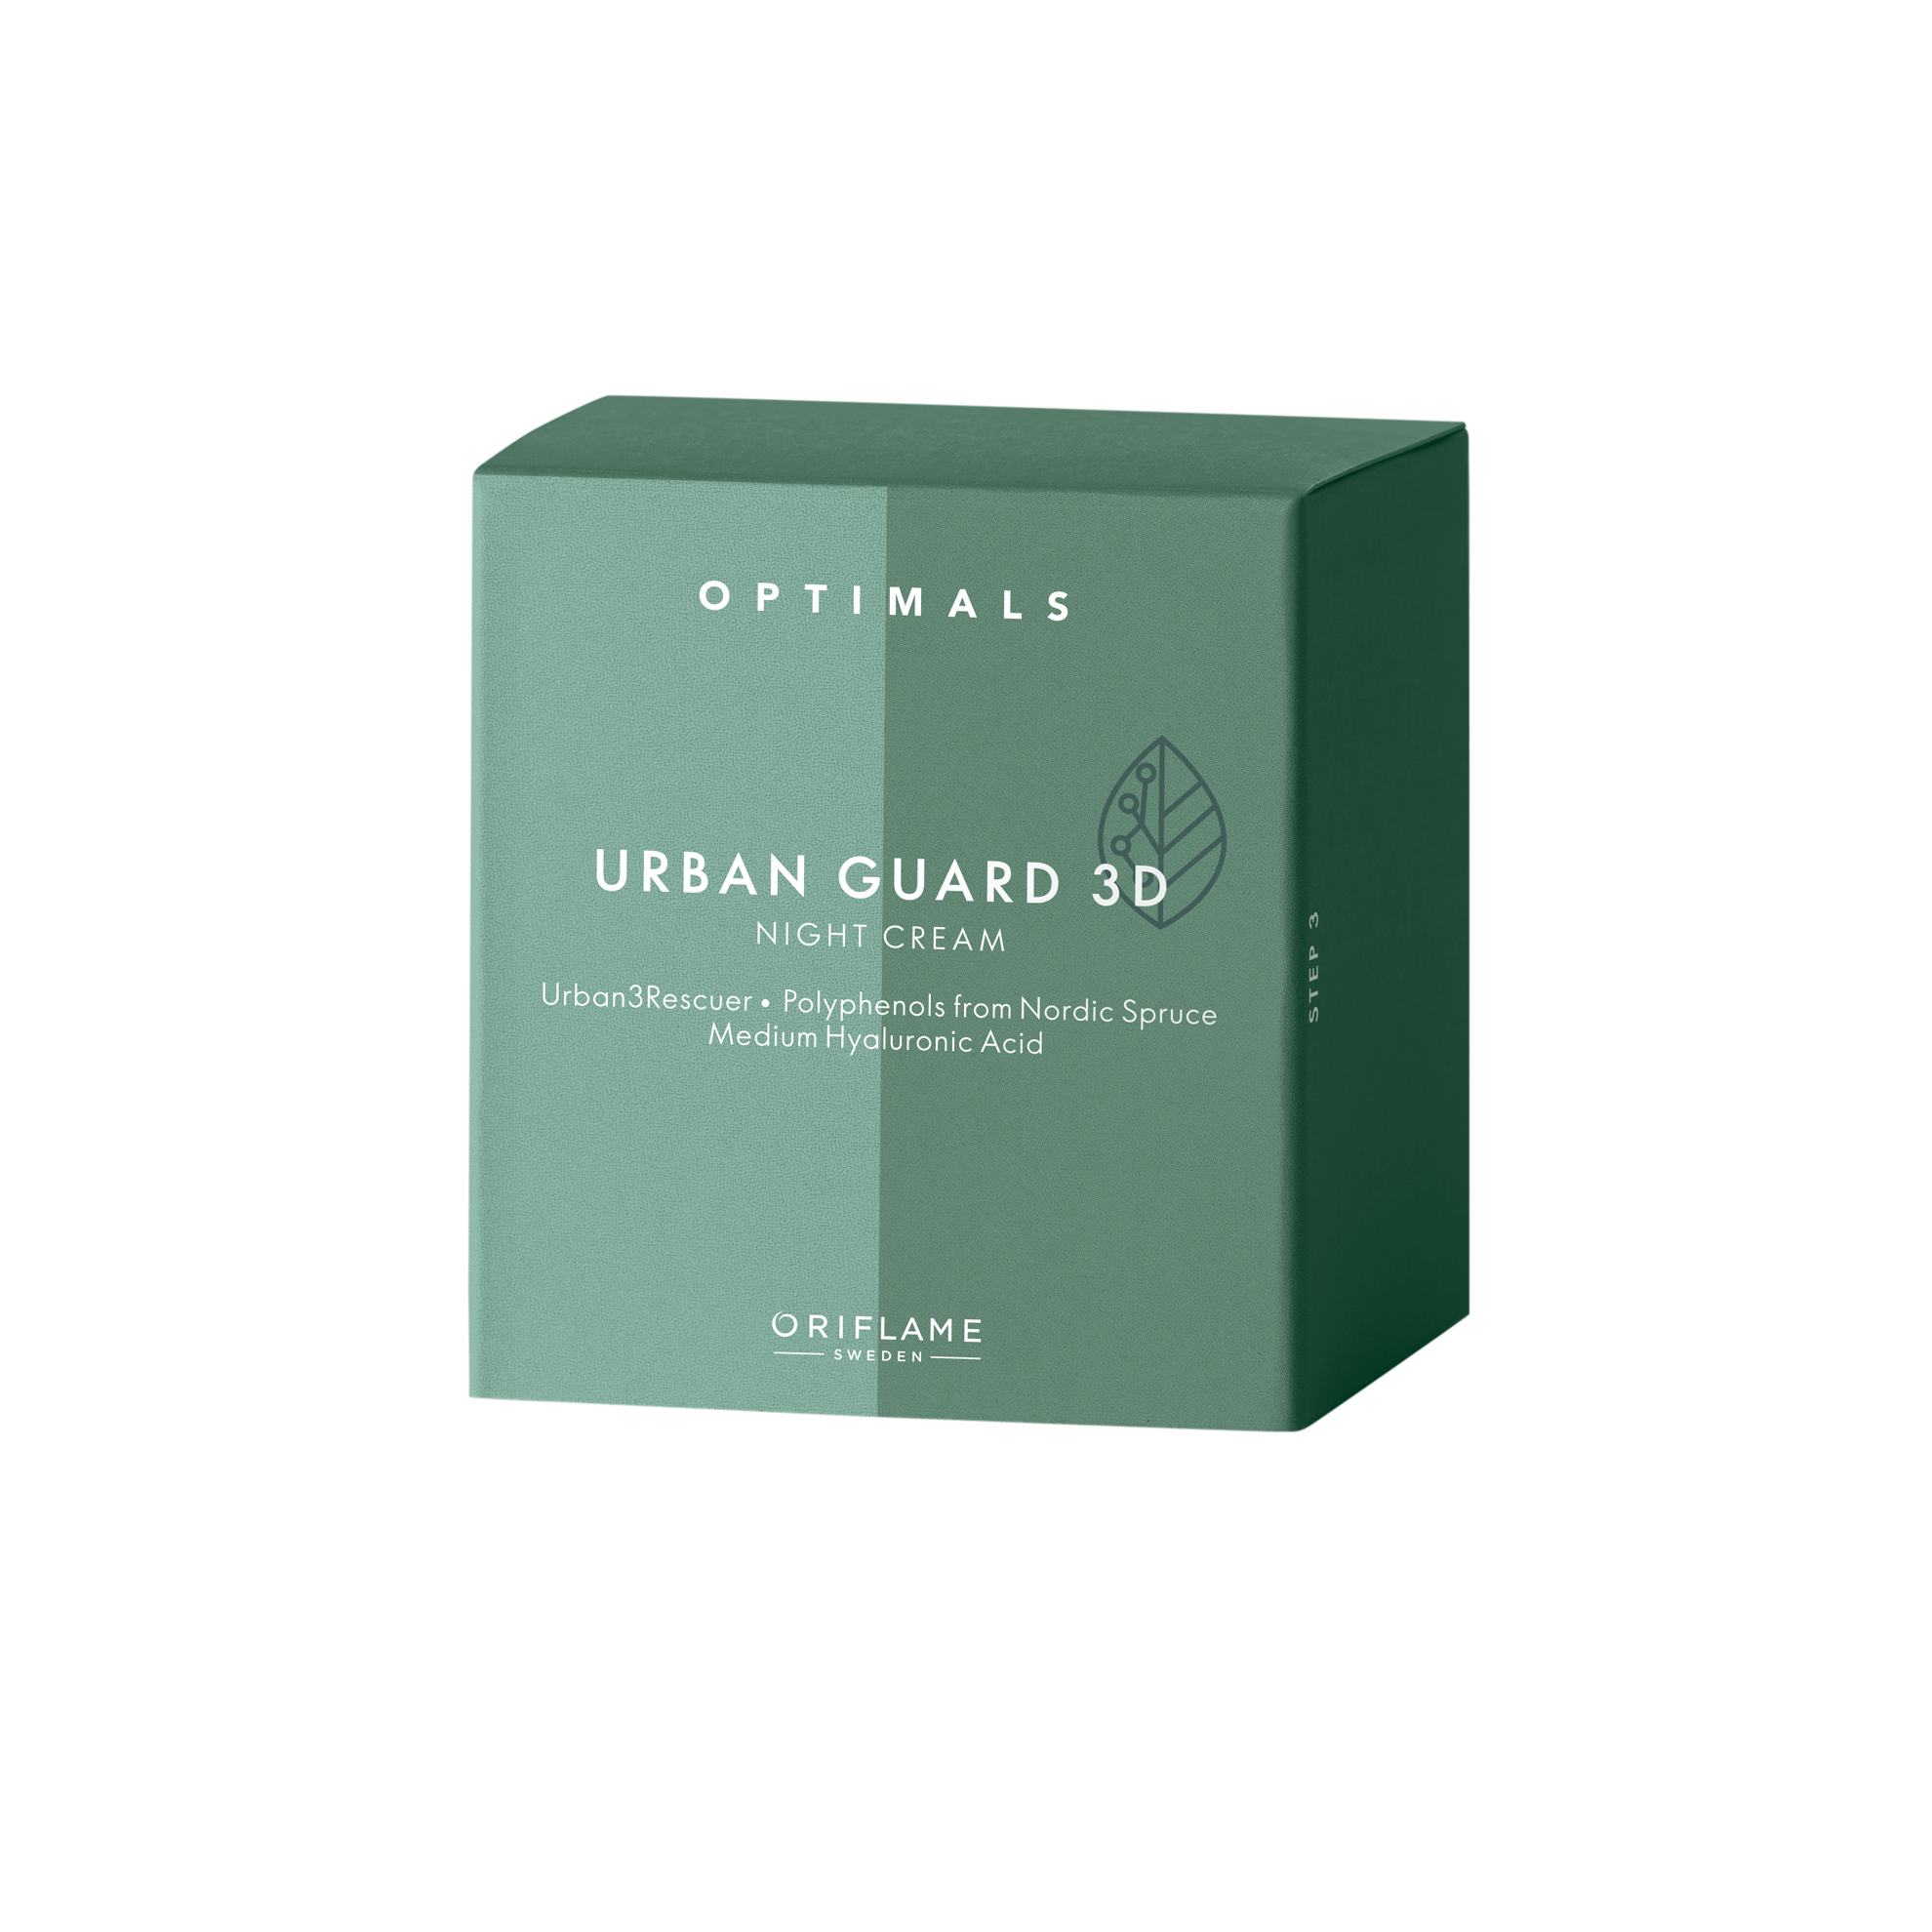 https://media-cdn.oriflame.com/productImage?externalMediaId=product-management-media%2fProducts%2f44260%2fKG%2f44260_1.png&id=15186919&version=1